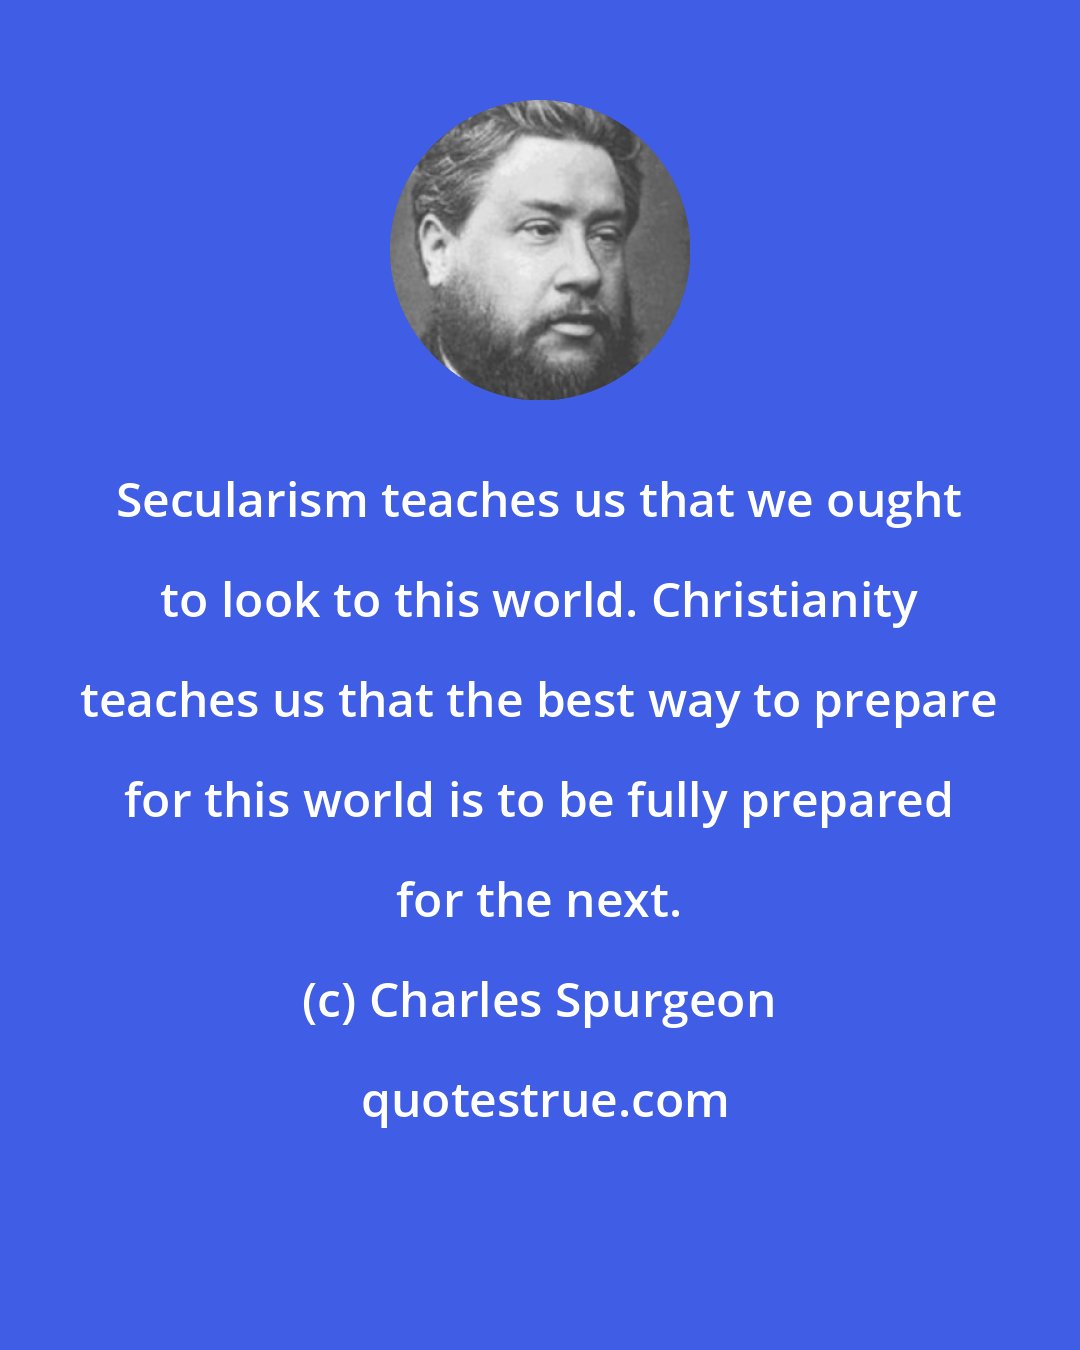 Charles Spurgeon: Secularism teaches us that we ought to look to this world. Christianity teaches us that the best way to prepare for this world is to be fully prepared for the next.